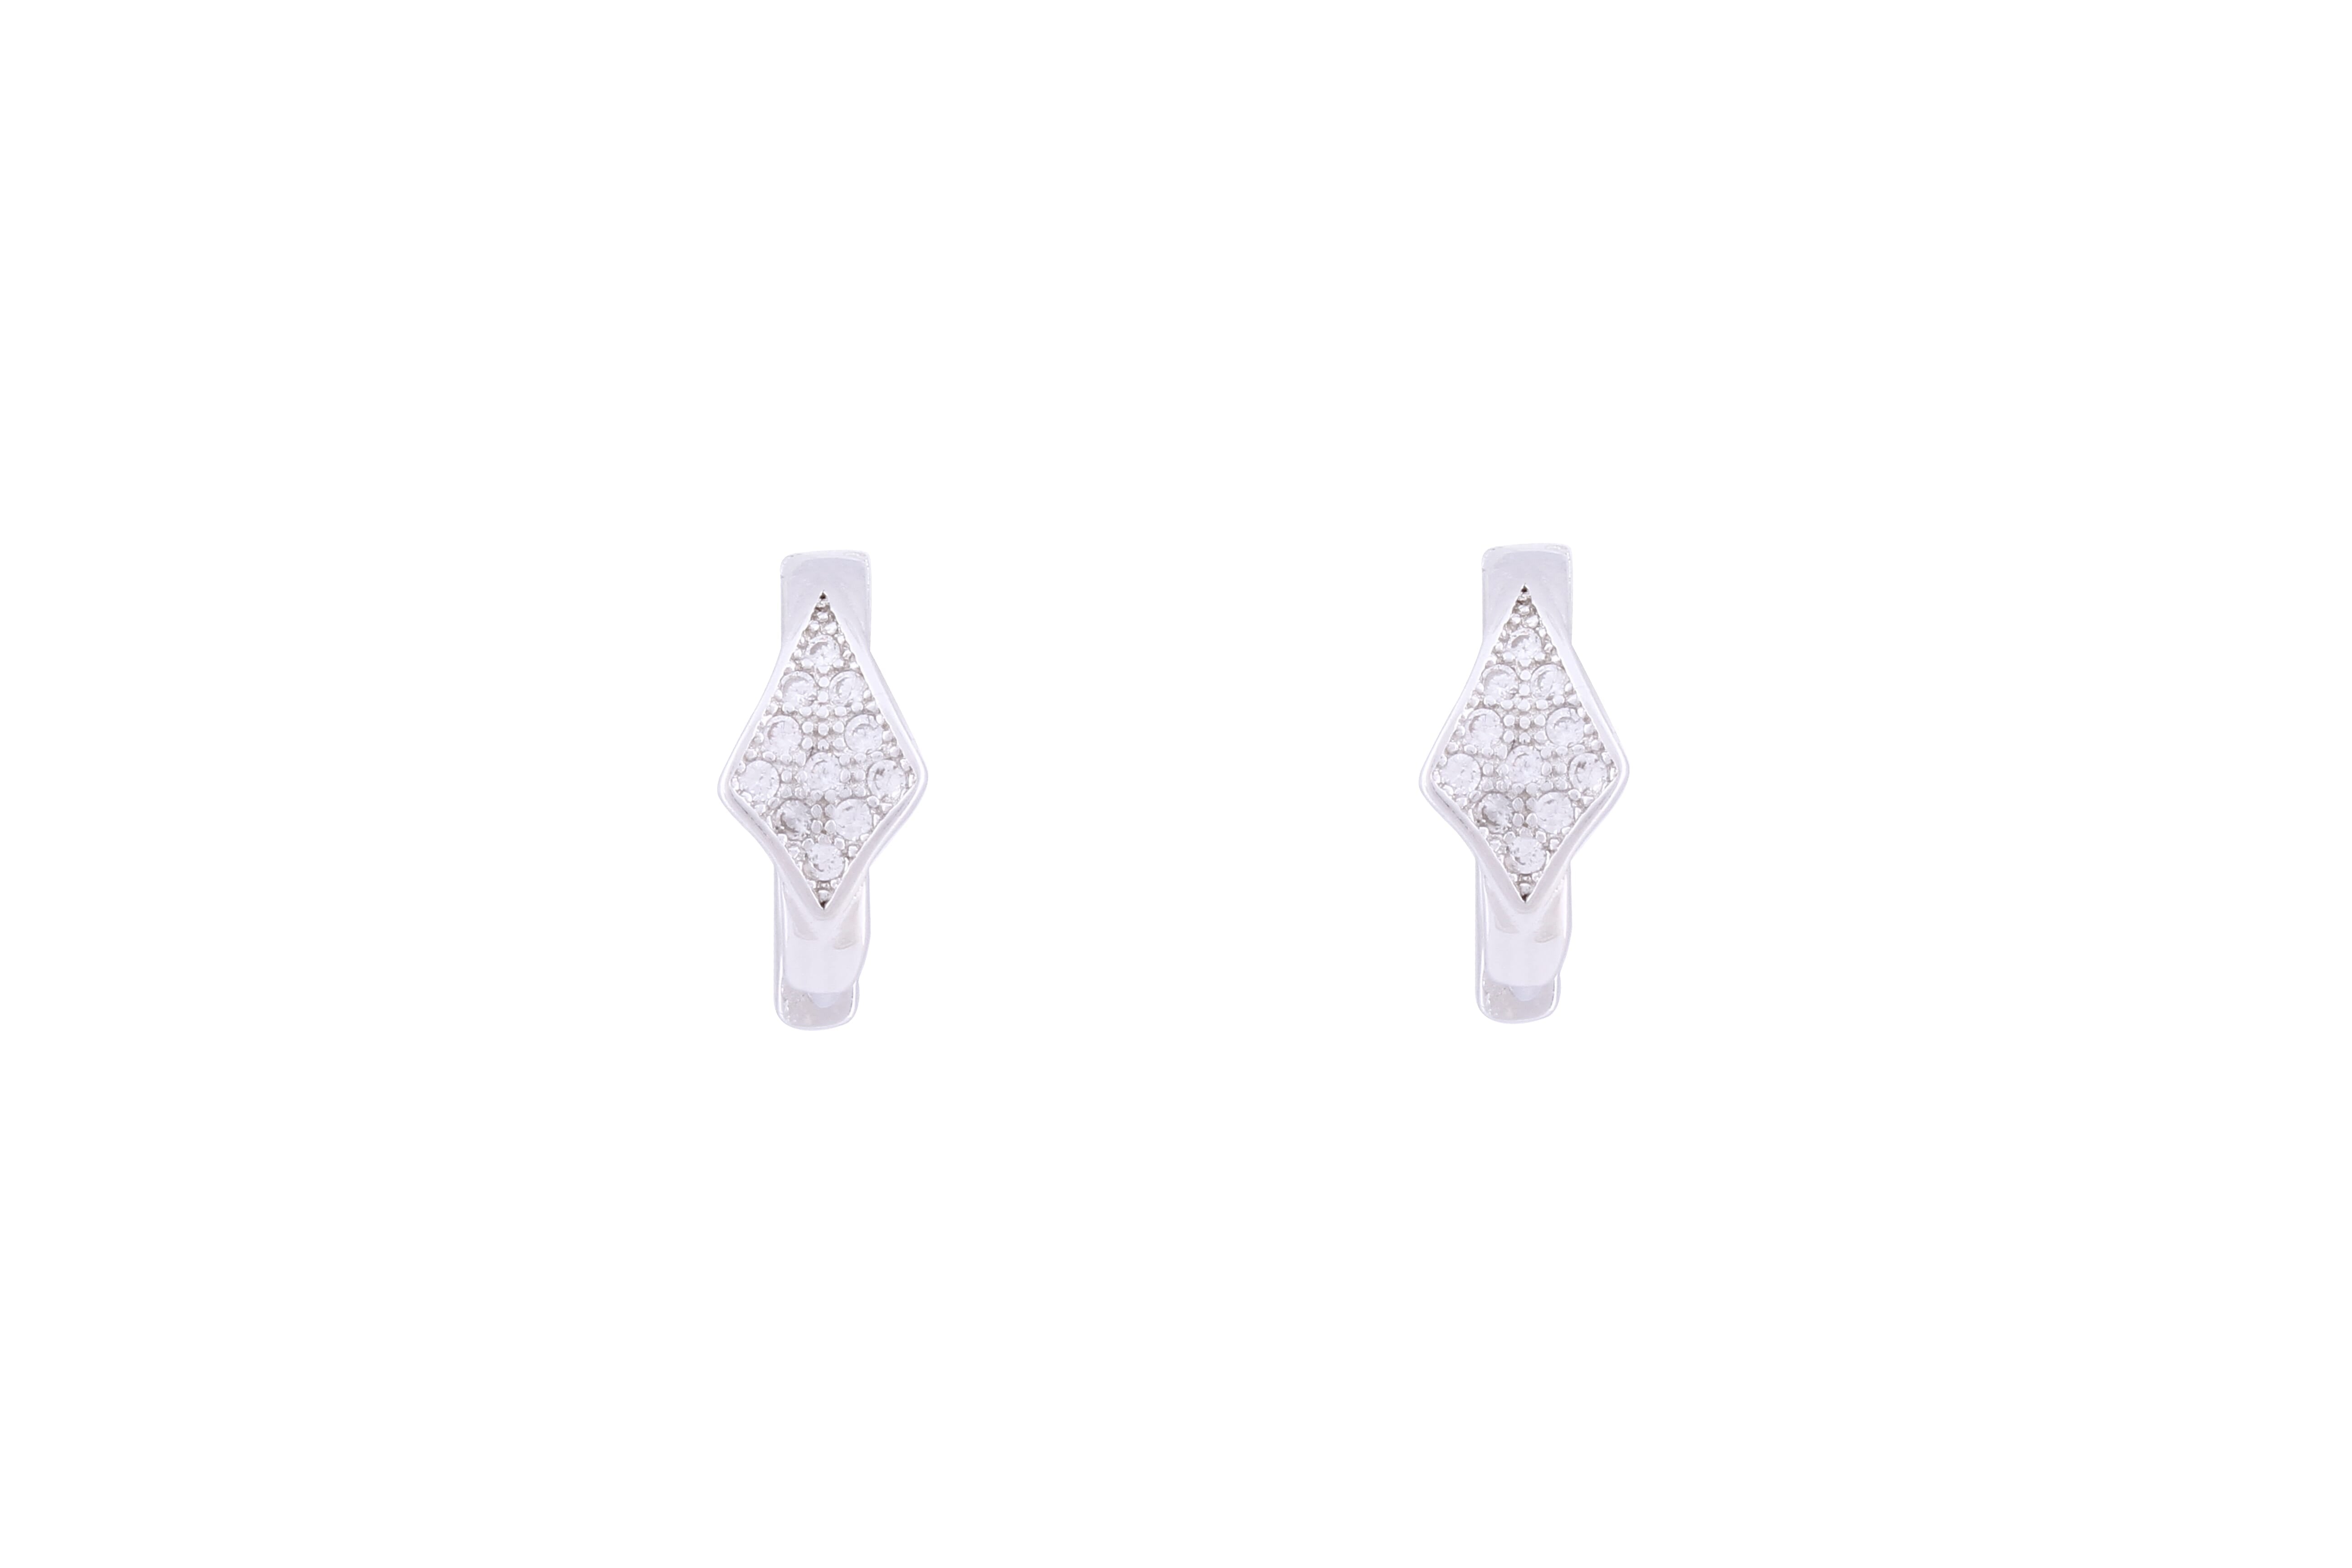 Asfour Crystal Hoop Earring With  Rhombus  Design in 925 Sterling Silver ER0403